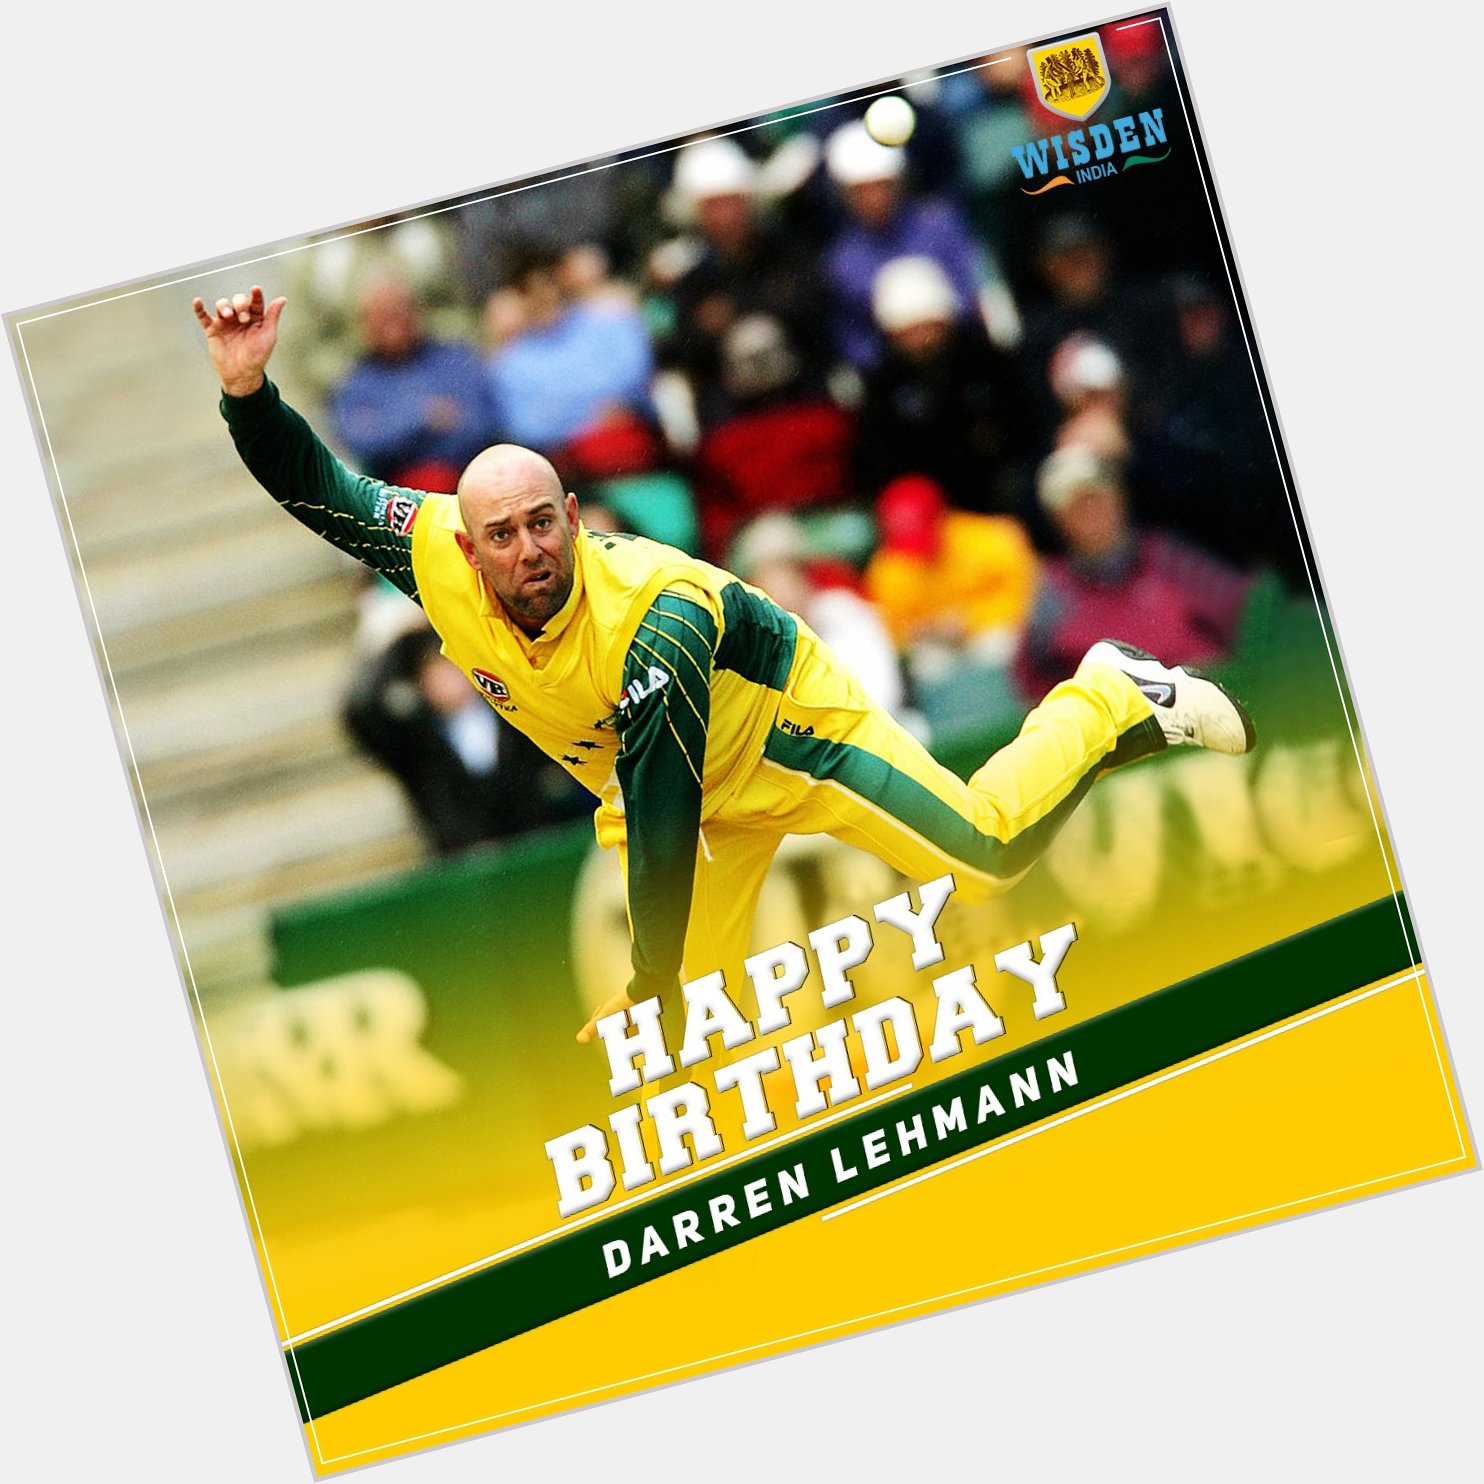 Wishing a very Happy Birthday to former player and current Australian coach,  